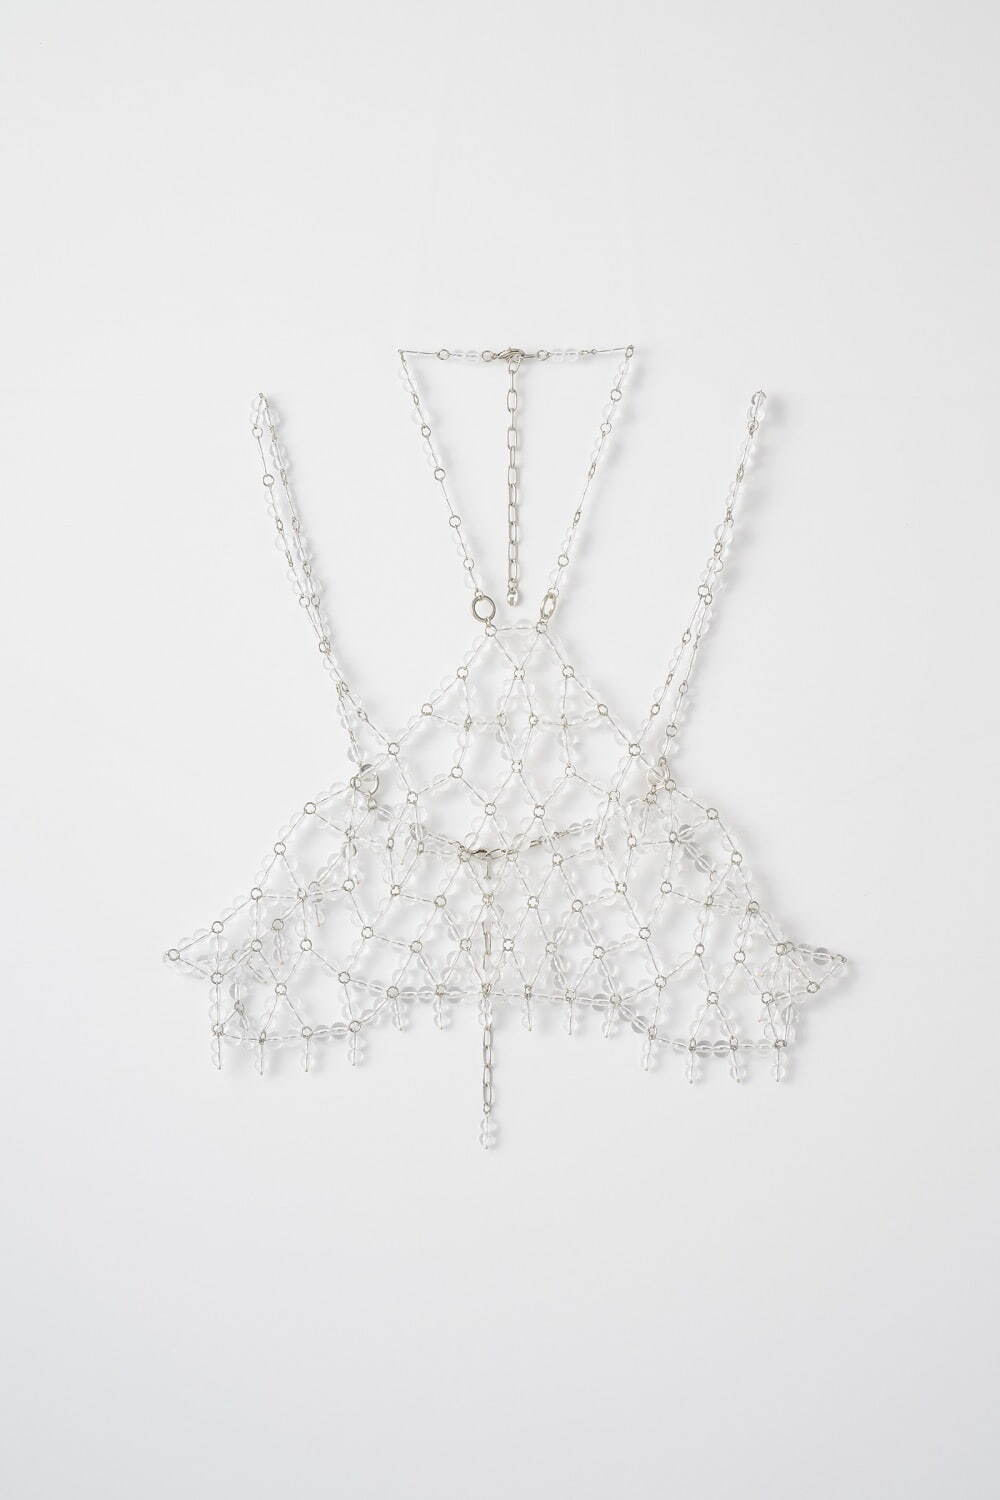 Dripping clear bustier 40,700円